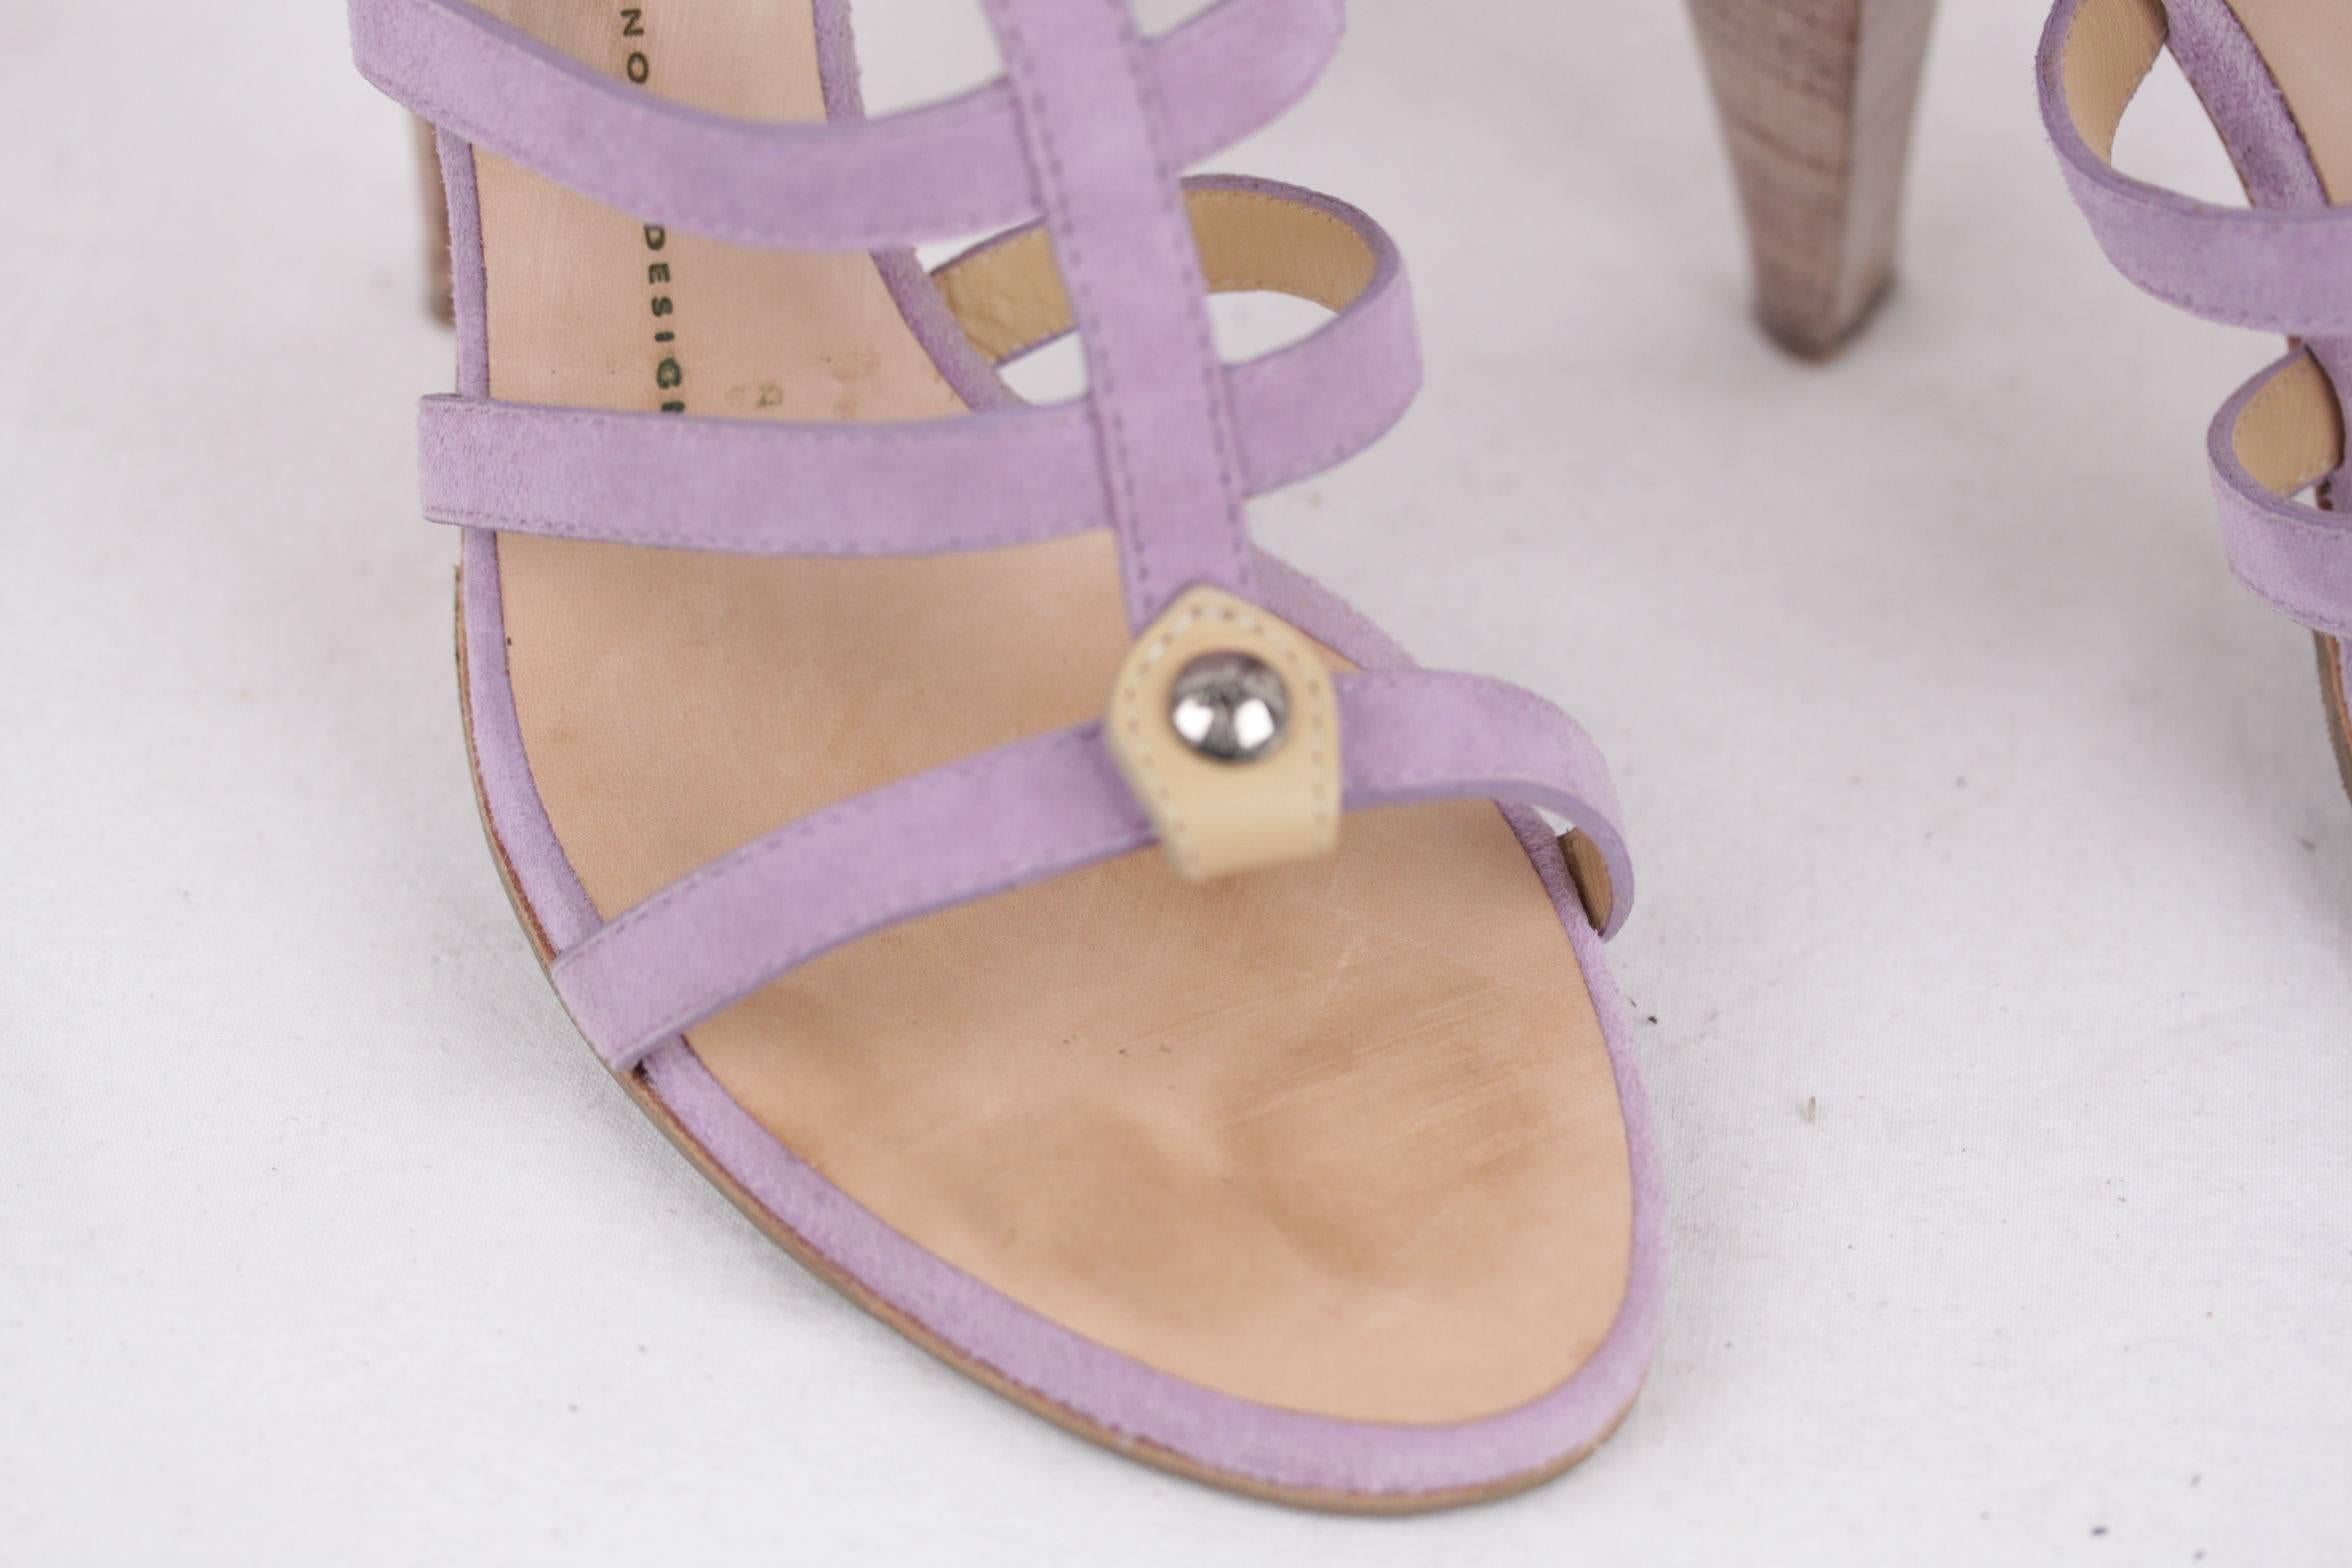 GIUSEPPE ZANOTTI DESIGN Lilac Suede CAGE Strappy HEELED Sandals HEELS Sz 39  4